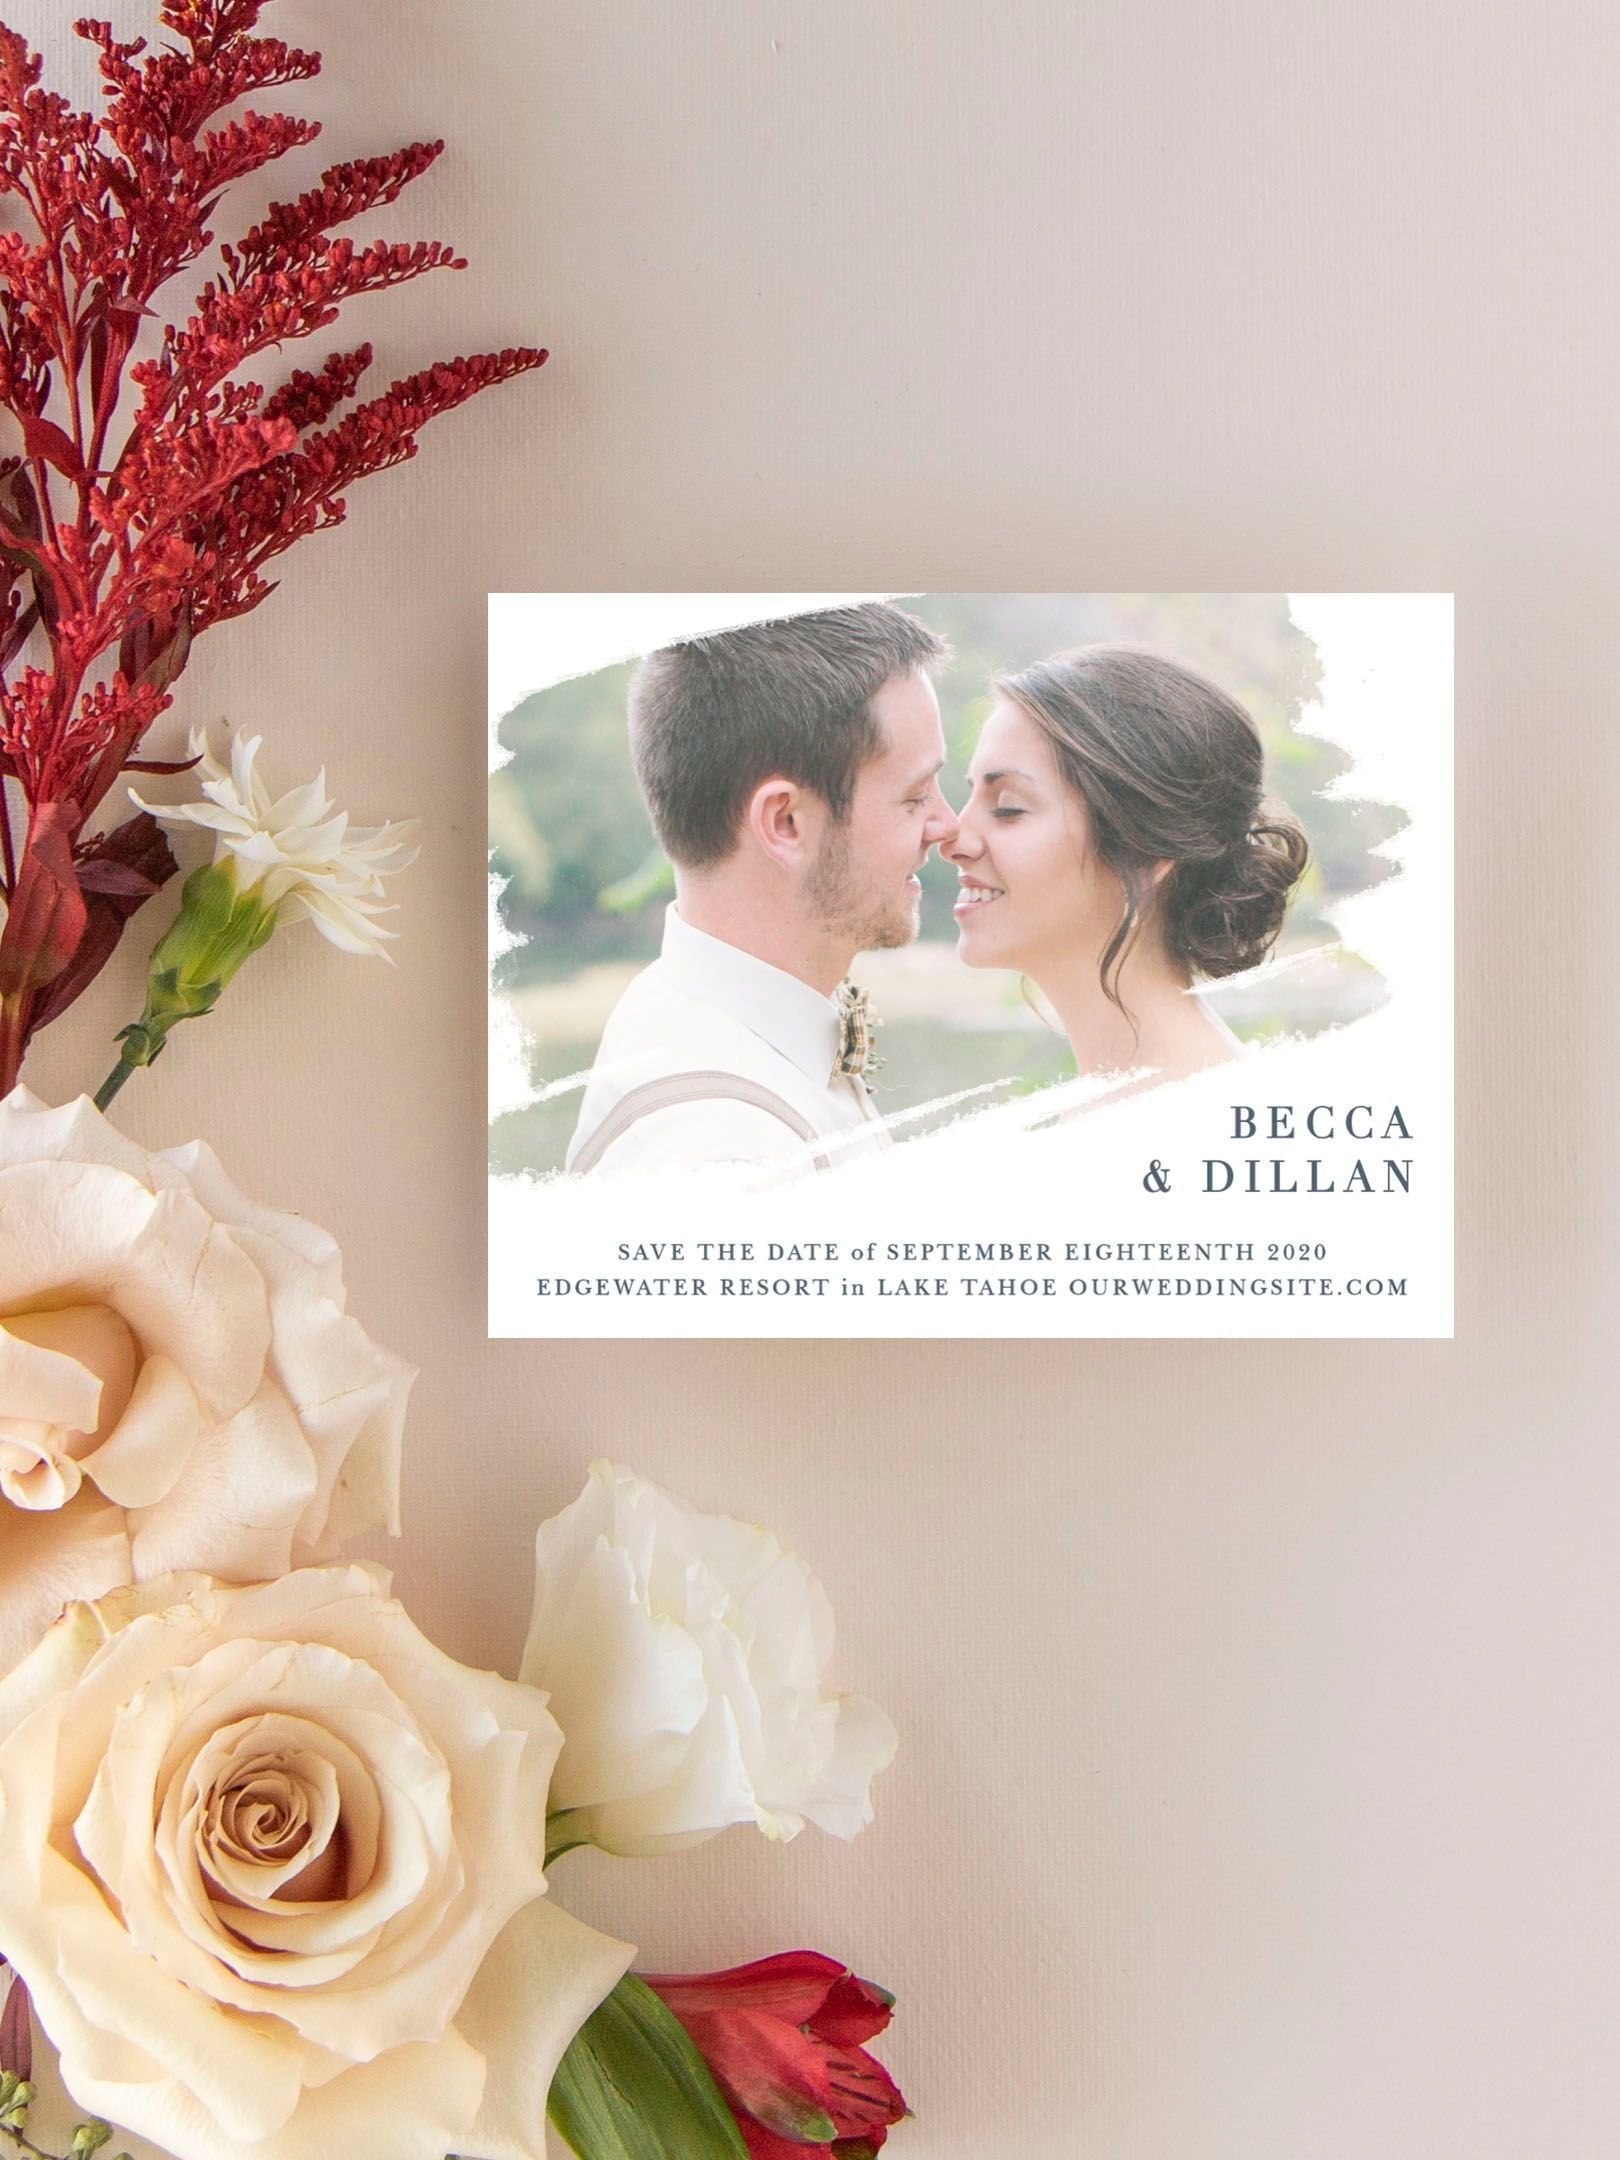 How To Design The Perfect Wedding Card